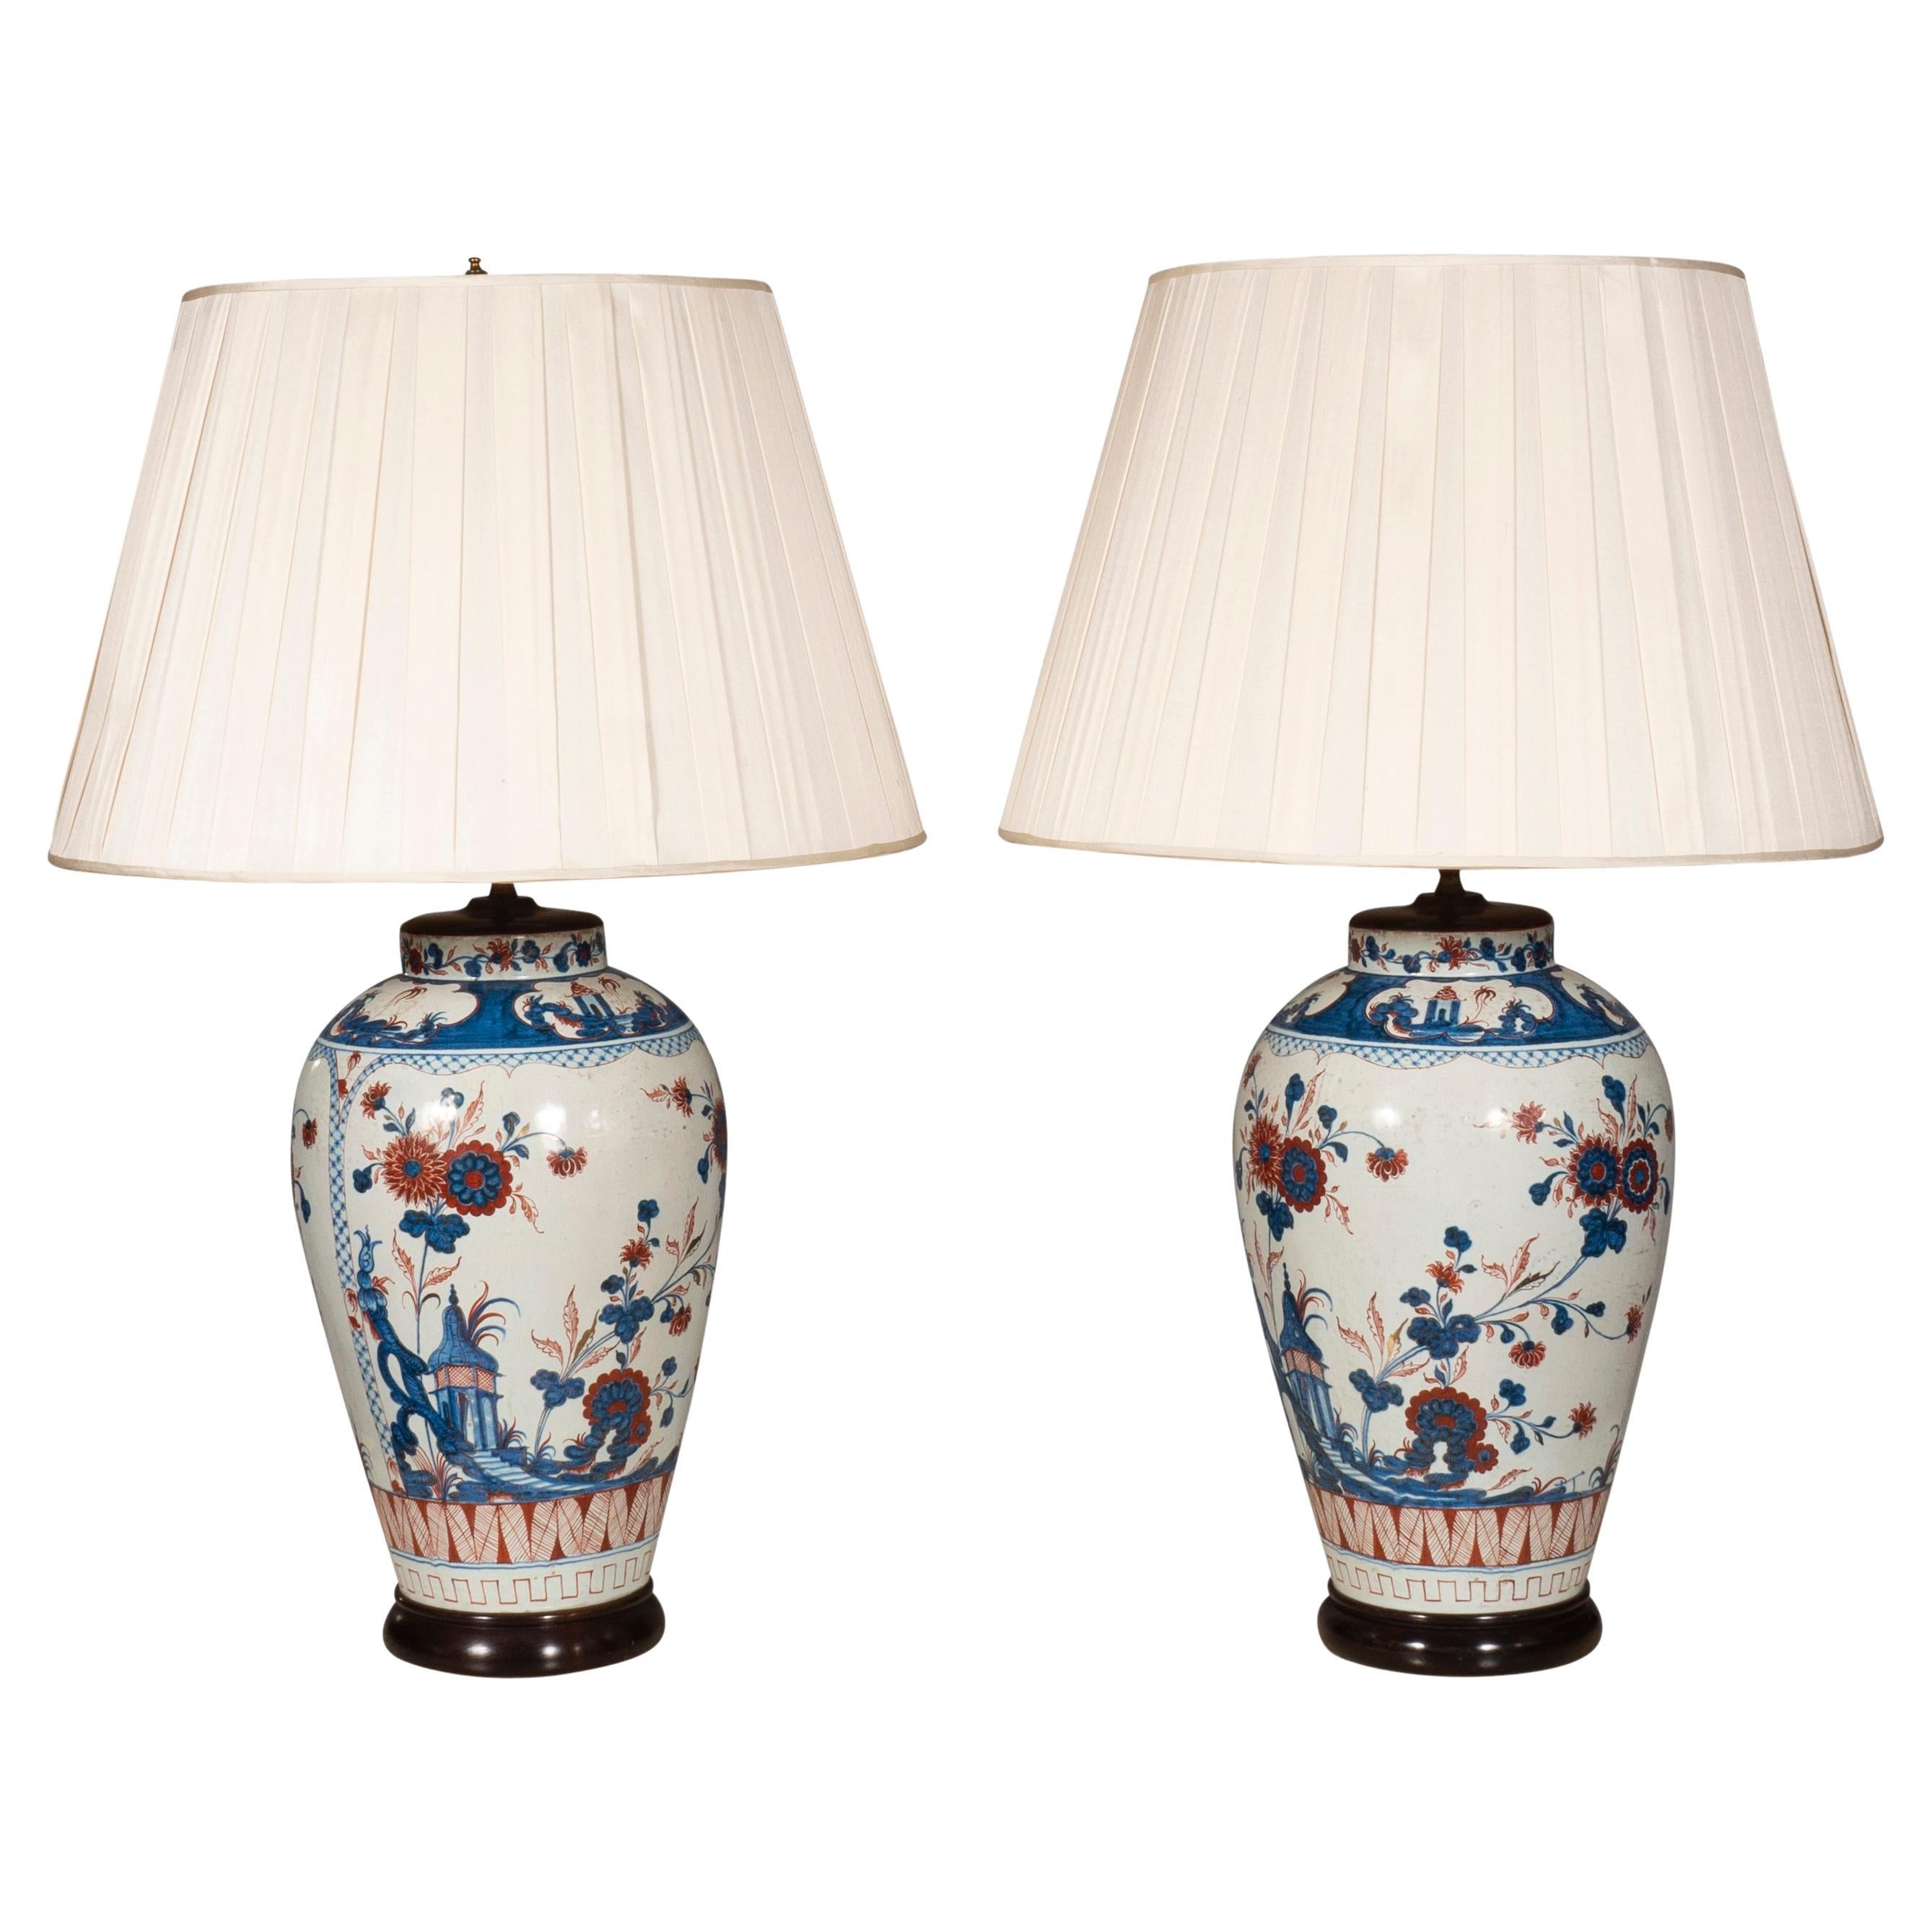 Pair of Large French Faience Table Lamps